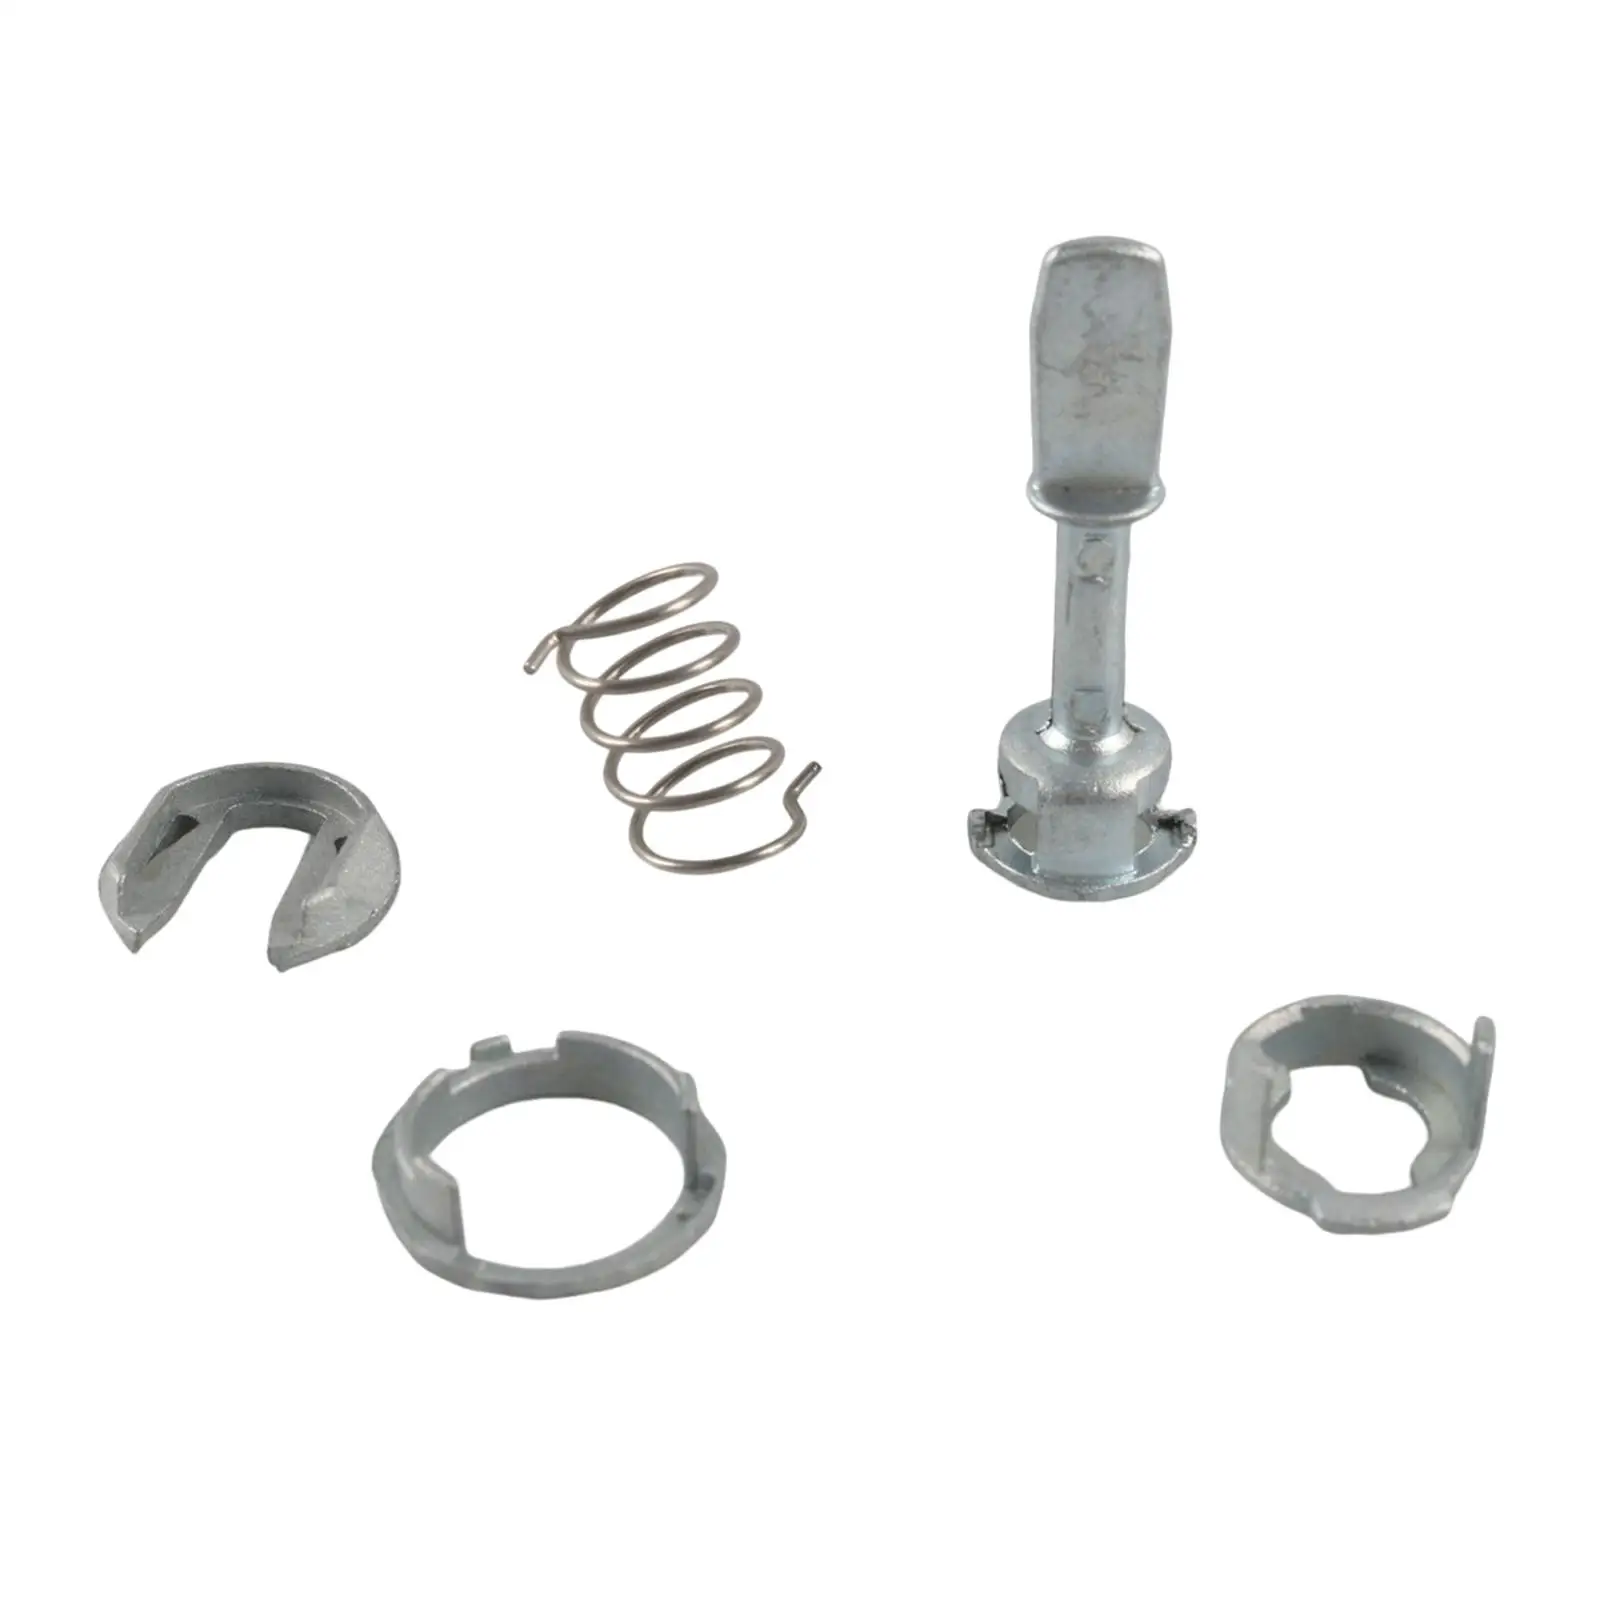 5 Pieces 604837167 Door Lock repair Kit Hardware for Golf IV MK4 Spare Parts Direct Replaces Durable Accessories